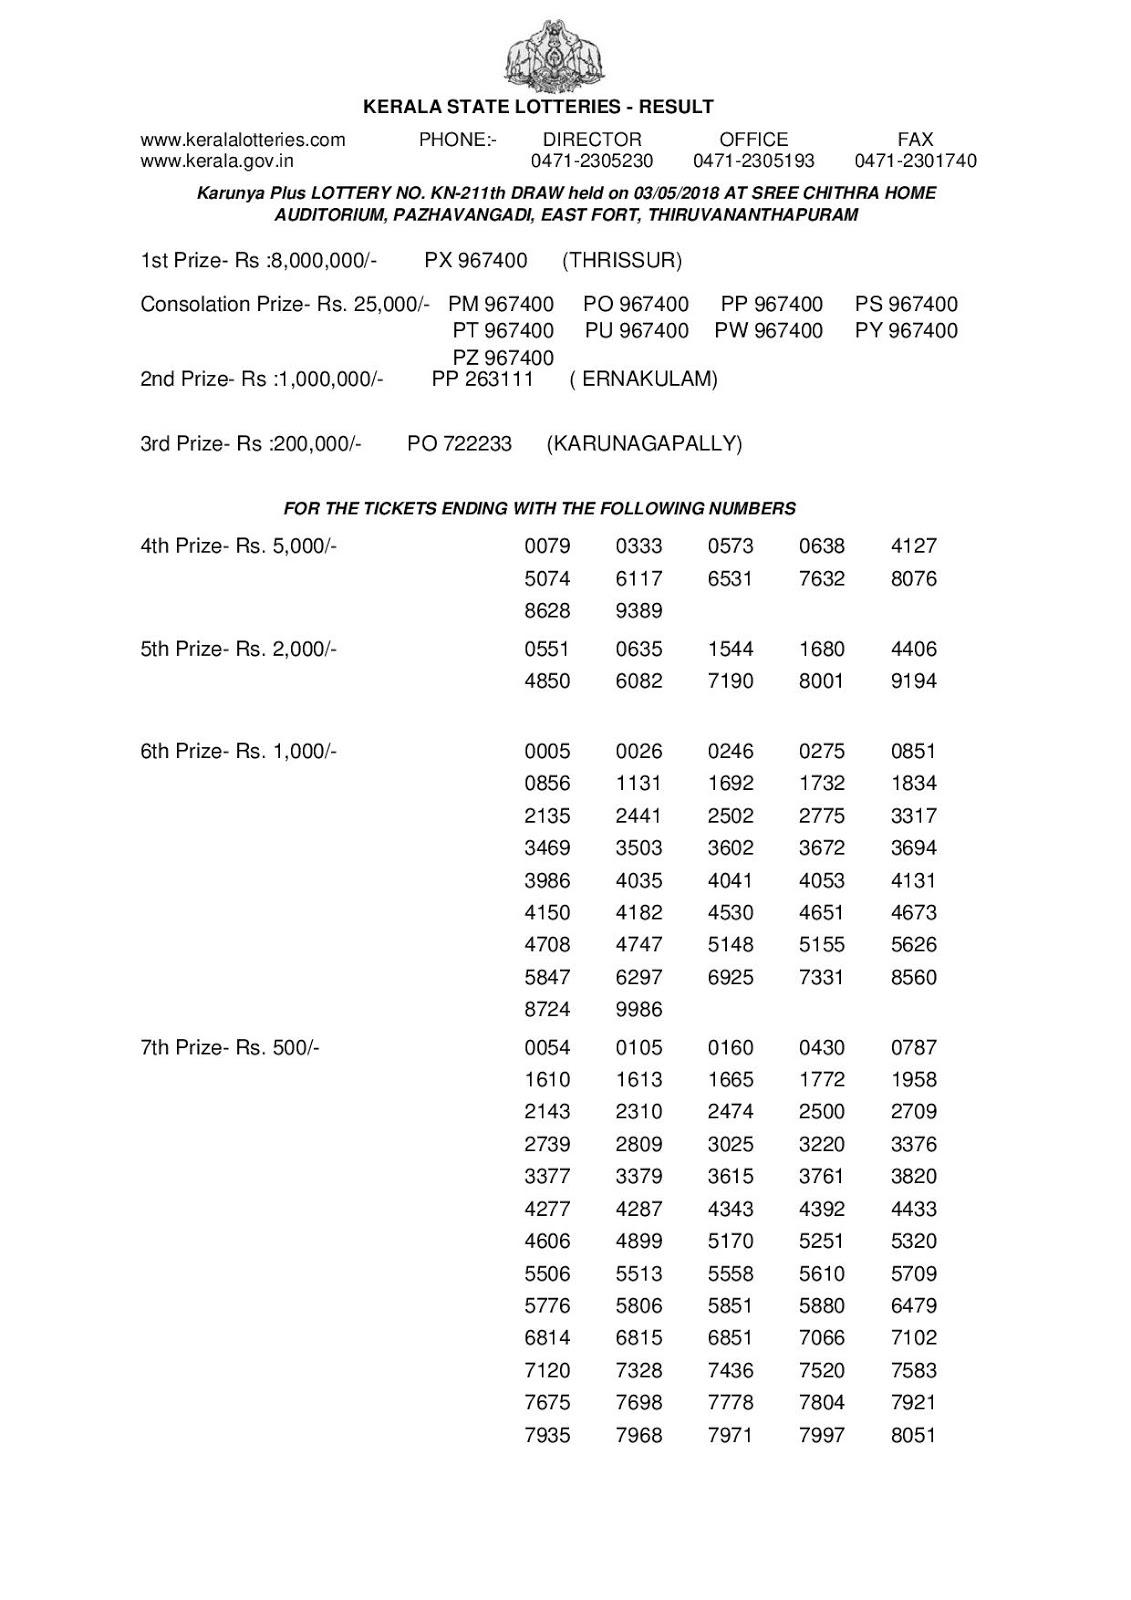 Kerala Lottery Results Today 03.05.2018 Karunya Plus KN-211 Lottery Results Official PDF